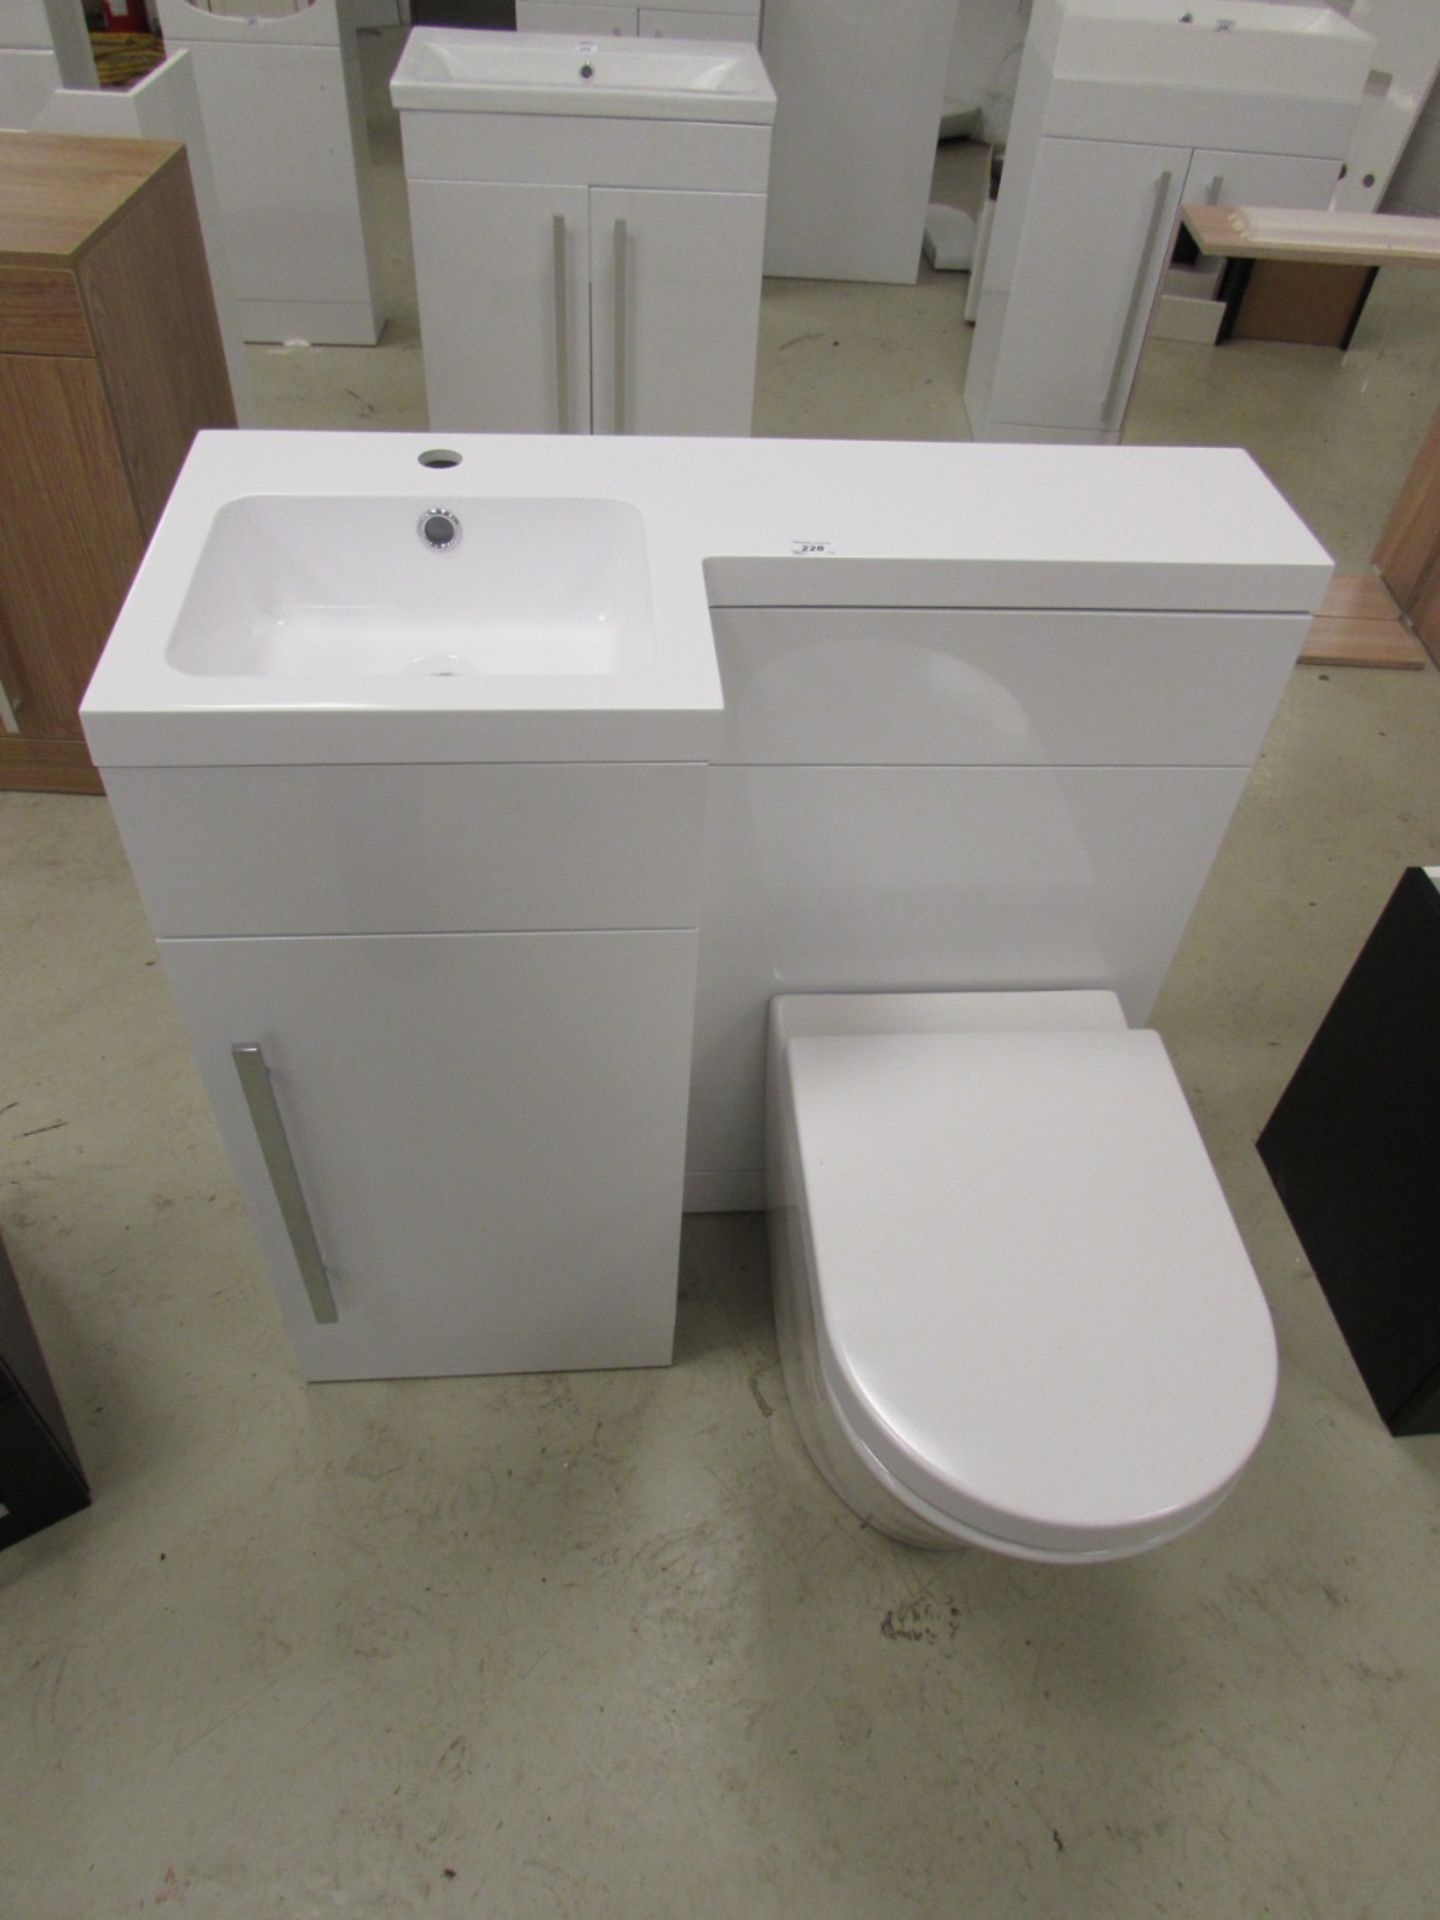 900mm wide compact cloakroom vanity unit and toilet set with soft close door - Image 3 of 3